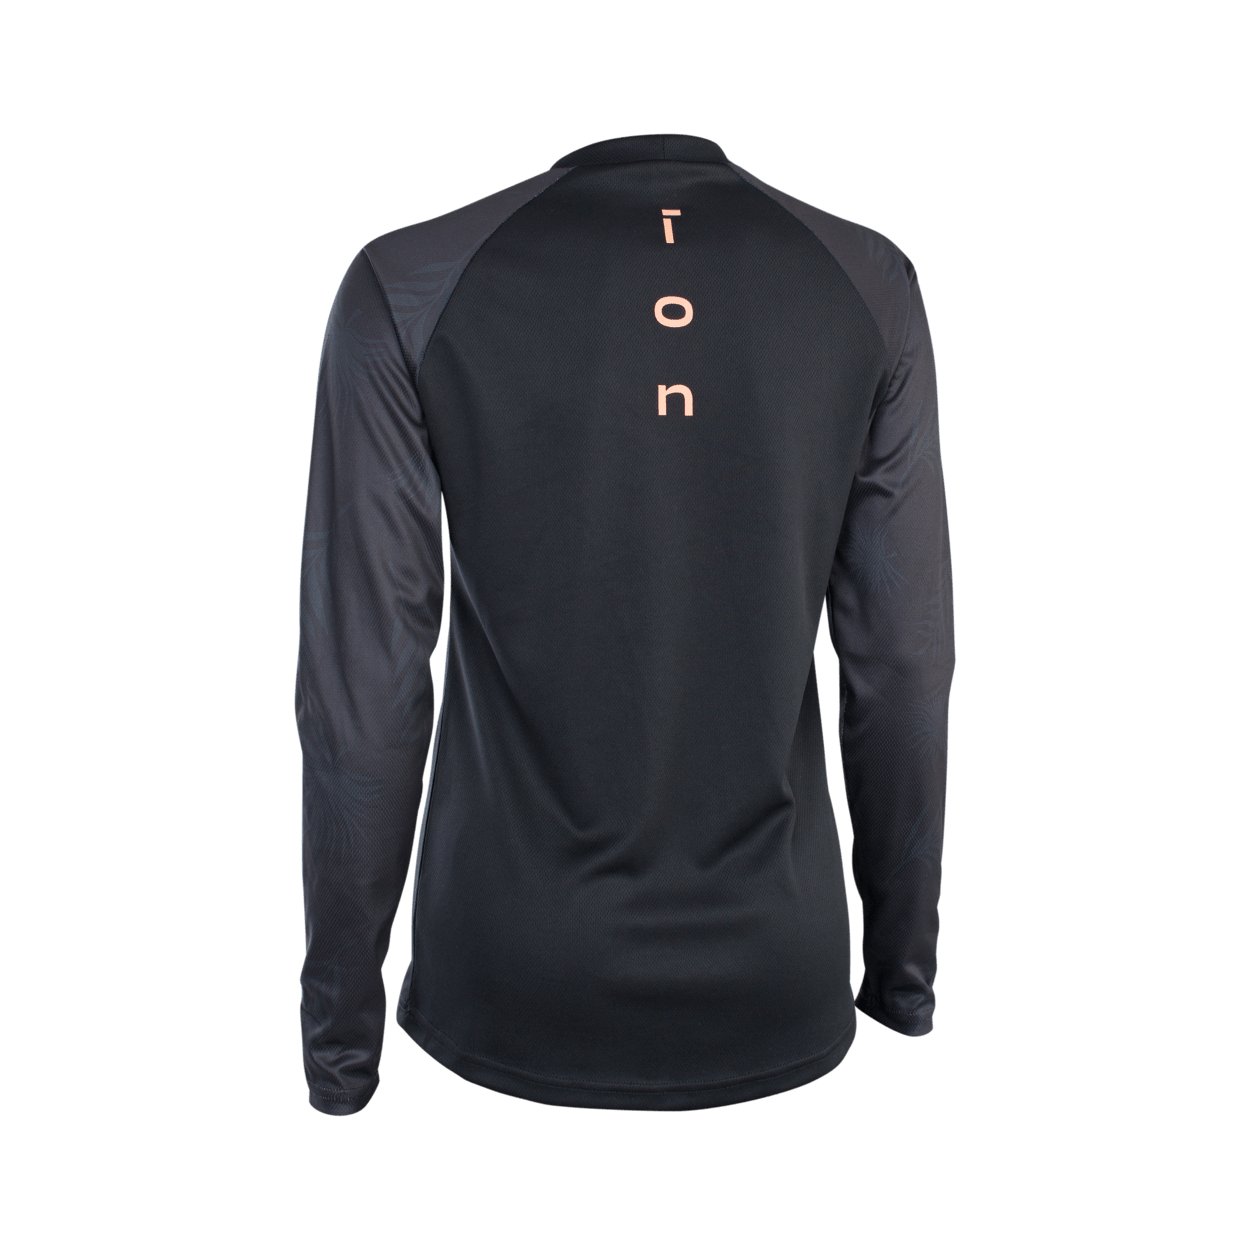 ION Wetshirt LS women 2022 - Worthing Watersports - 9010583051543 - Tops - ION Water